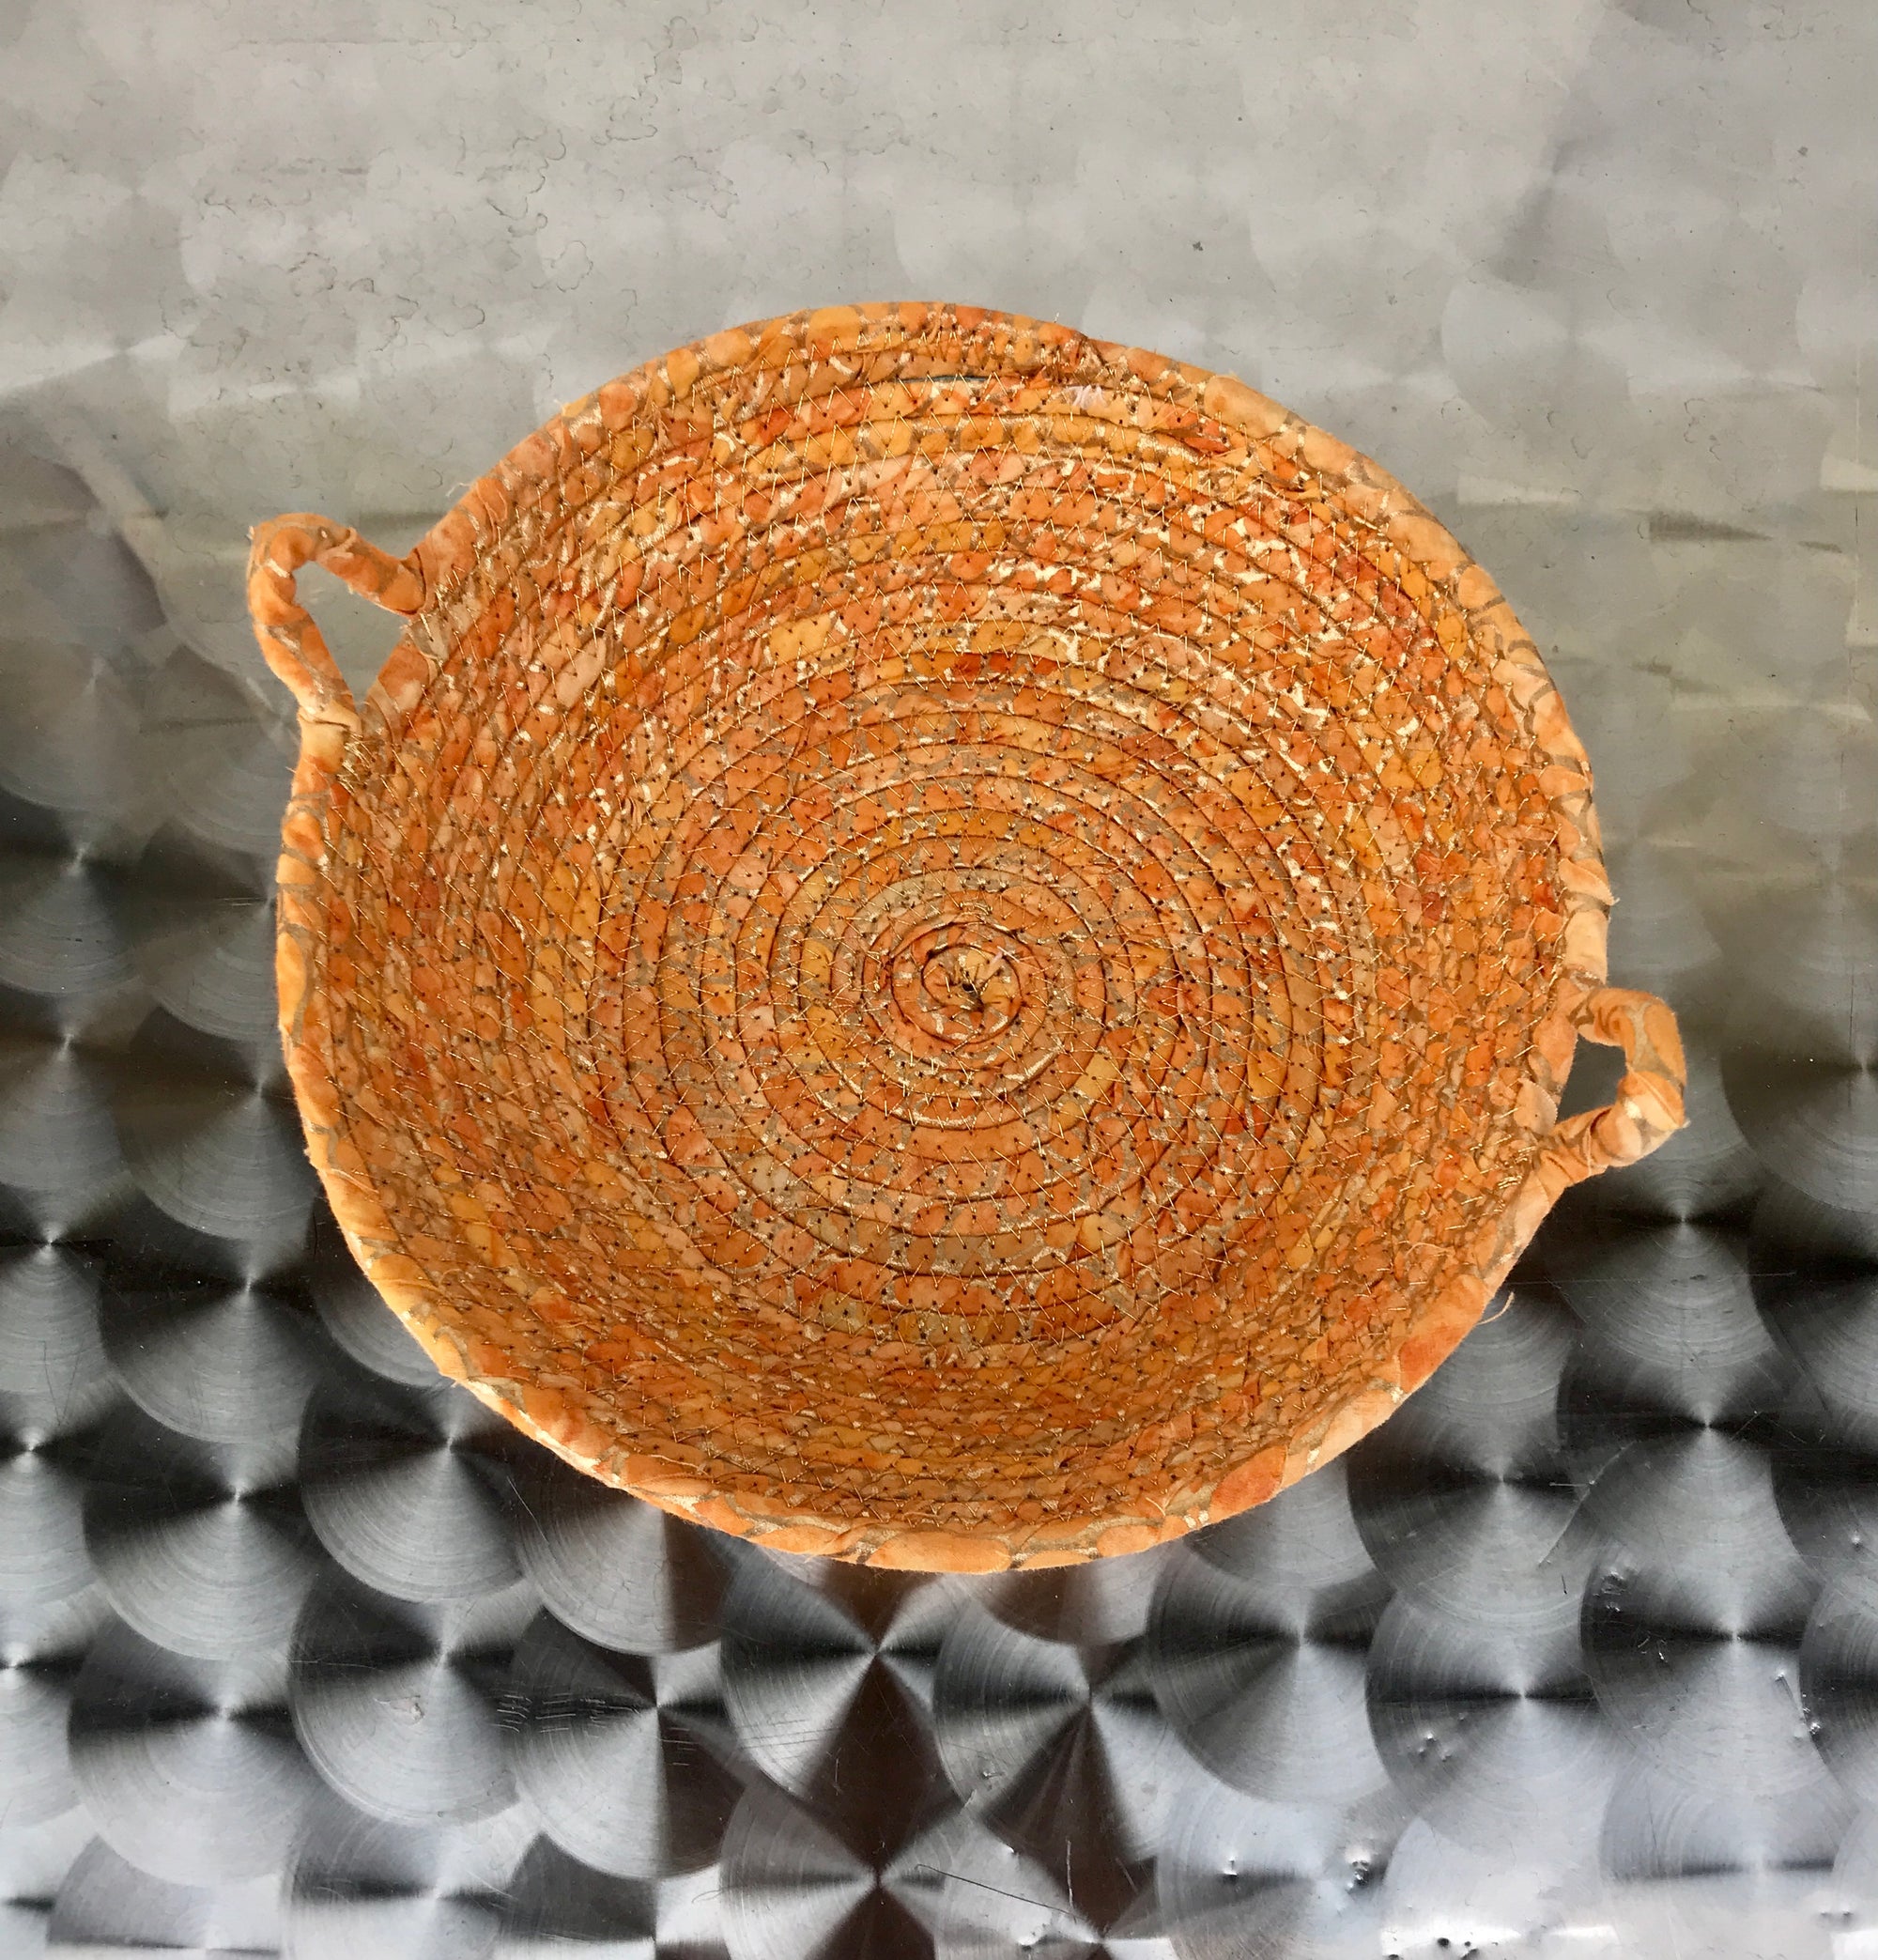 Wrapped Coiled Bowl Metallic Orange and Gold